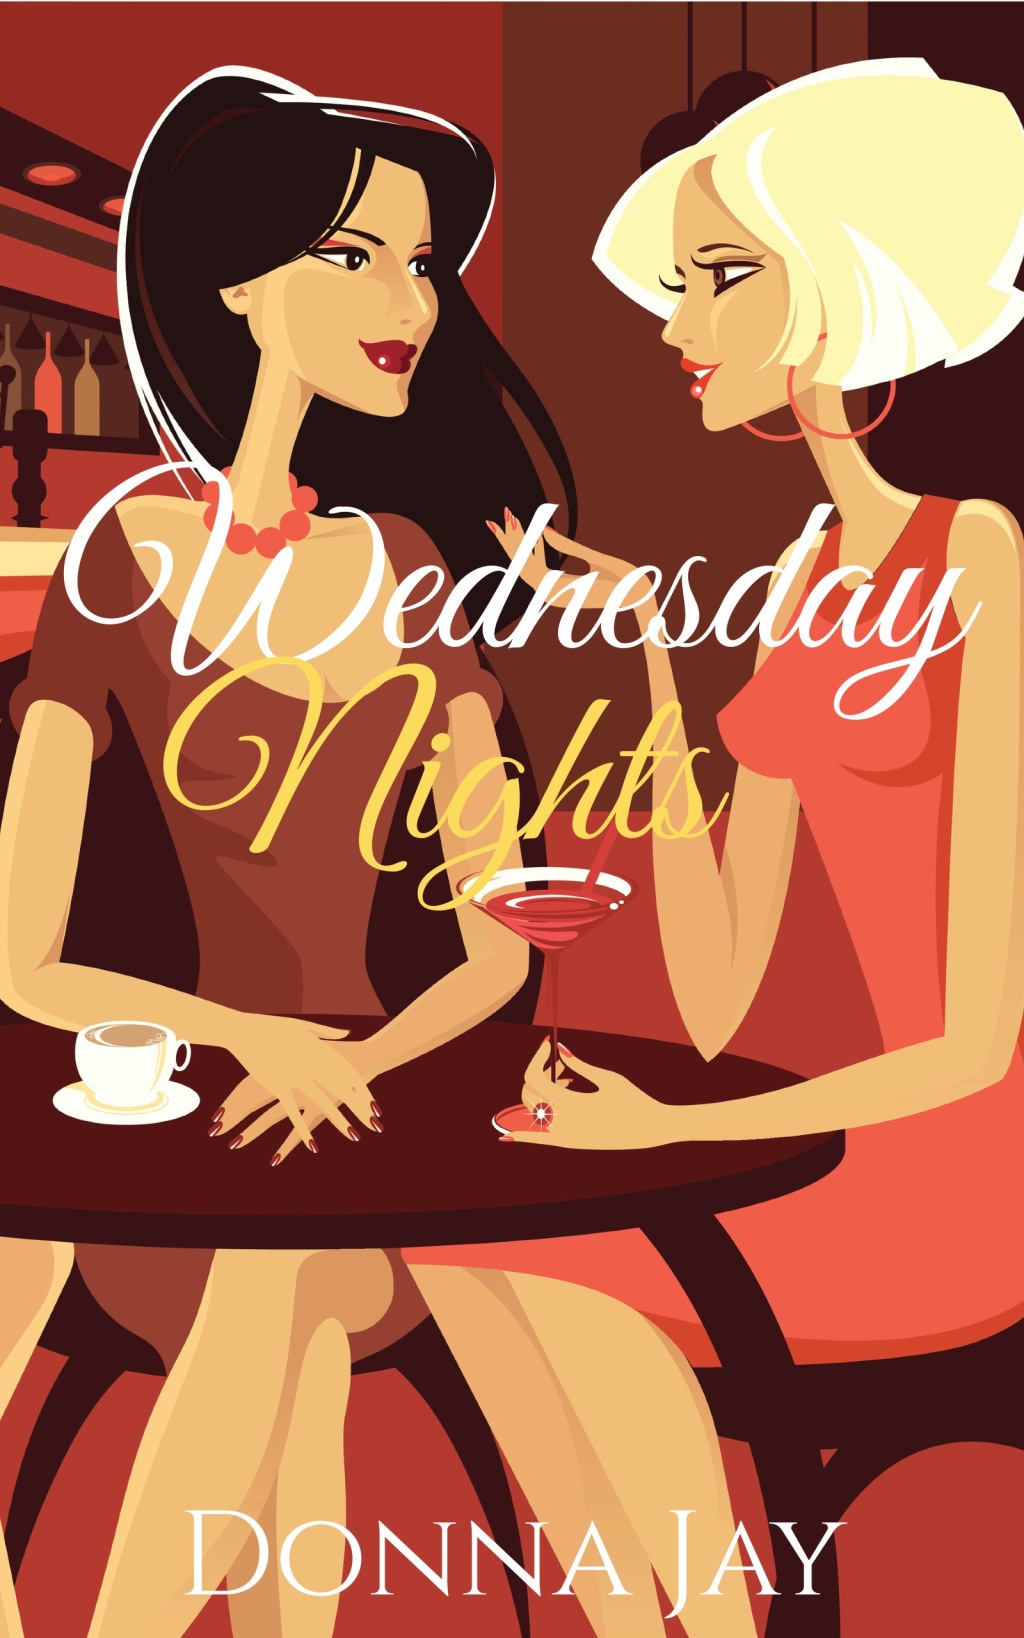 Book Review: Wednesday Nights by Donna Jay (romance, lesbian)